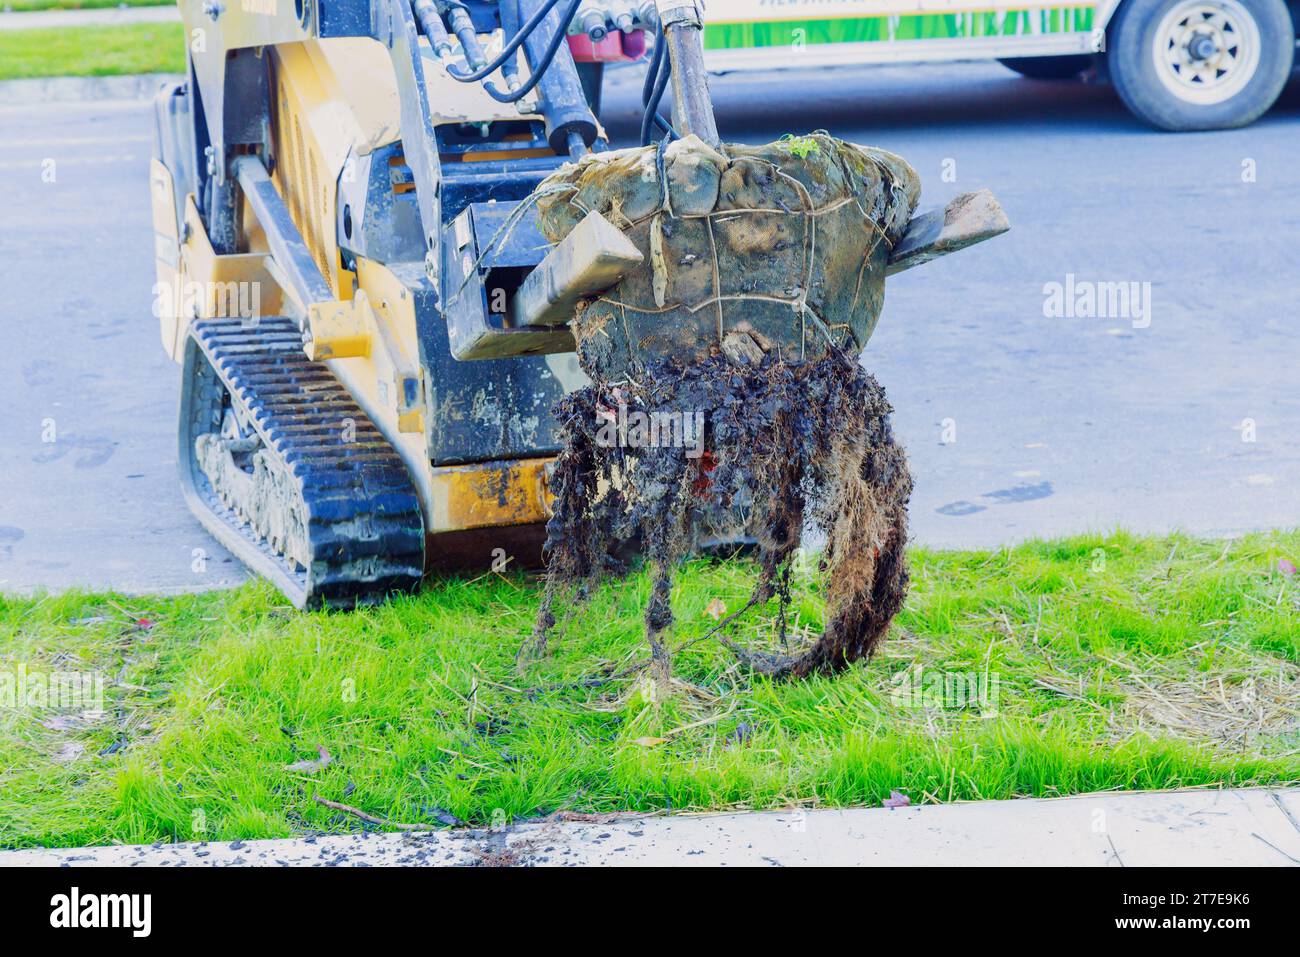 Tree seedlings are being planted in garden by landscaper using tractor near house Stock Photo